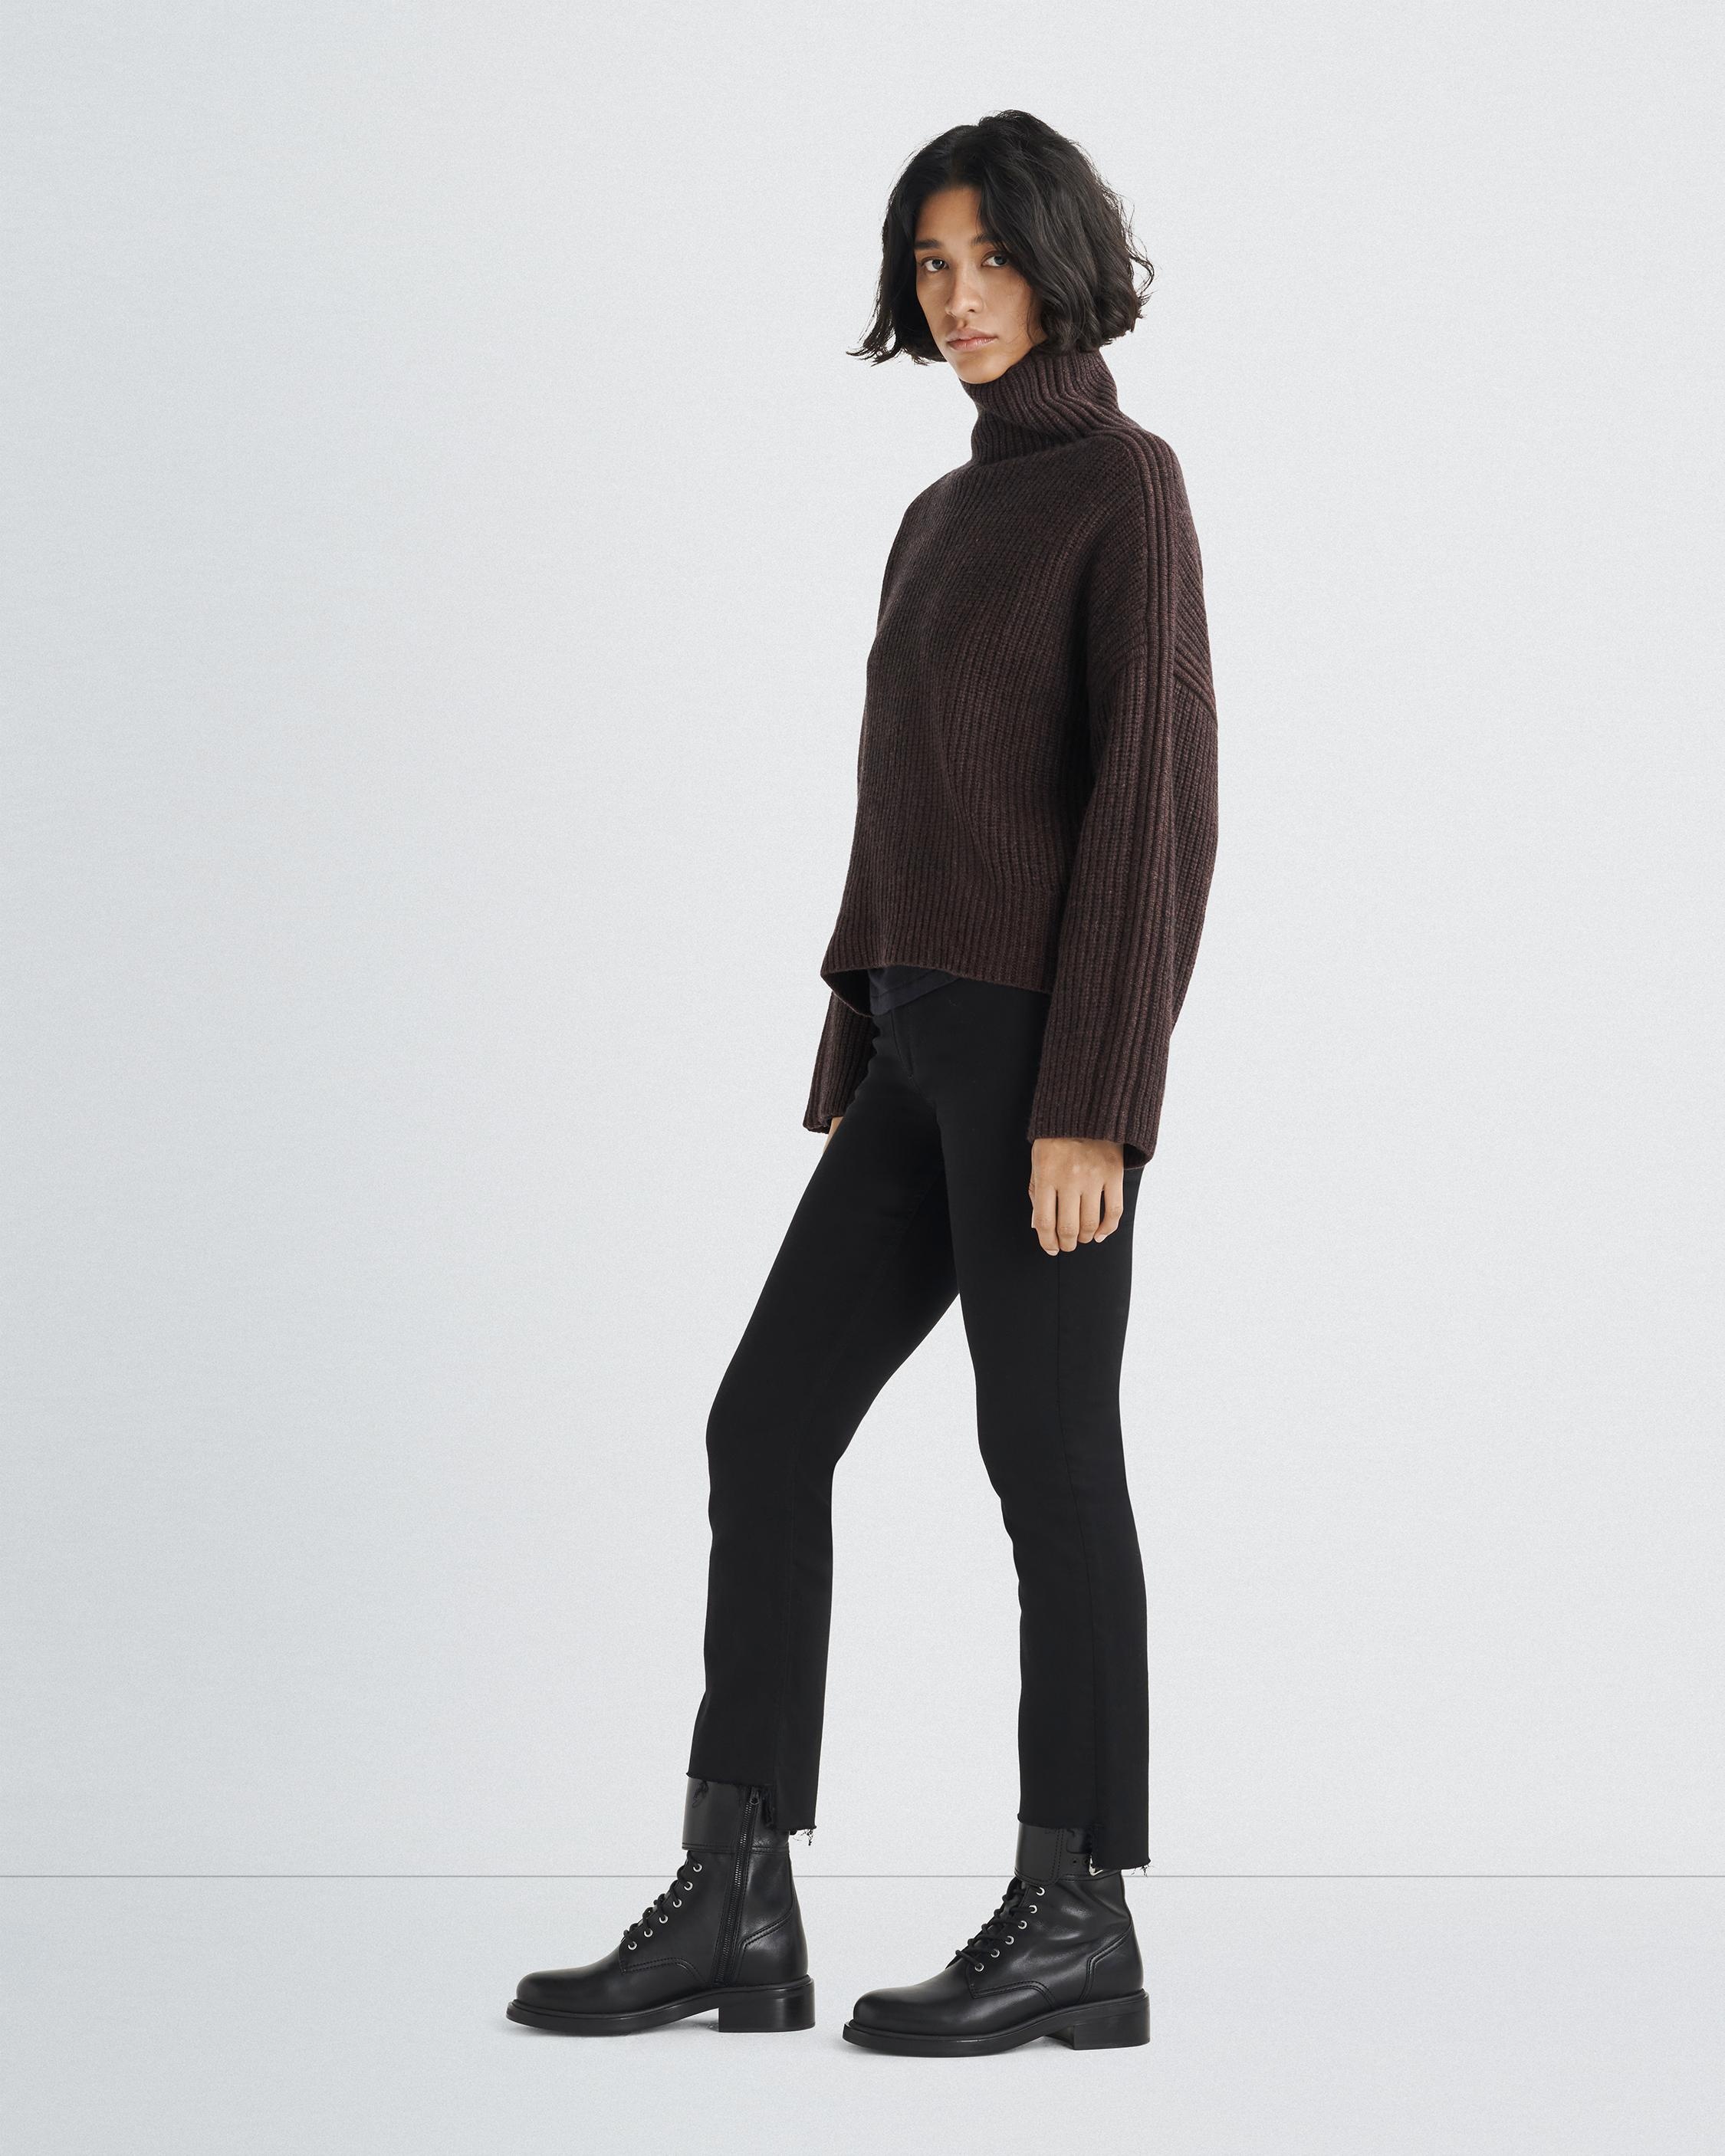 Connie Wool Turtleneck
Oversized Fit - 4